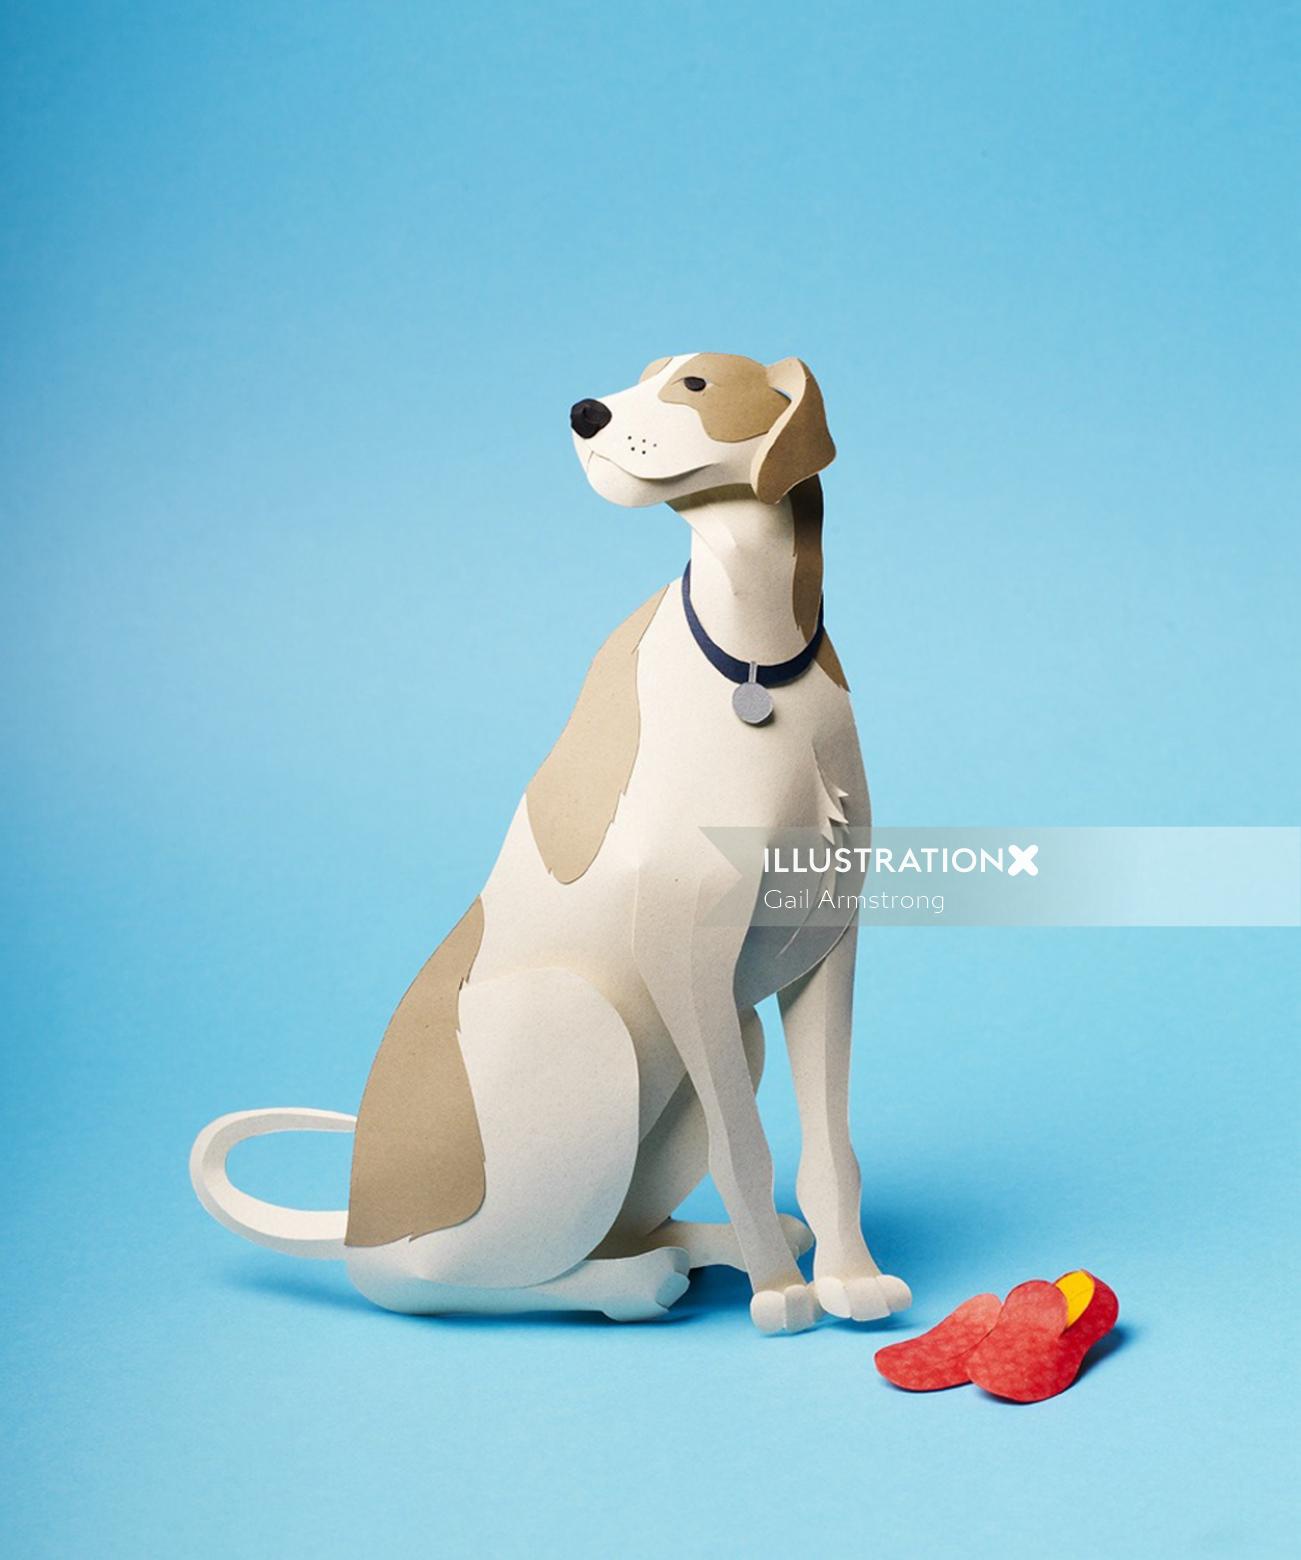 A pet dog sits with slippers 3D paper art illustration by Gail Armstrong